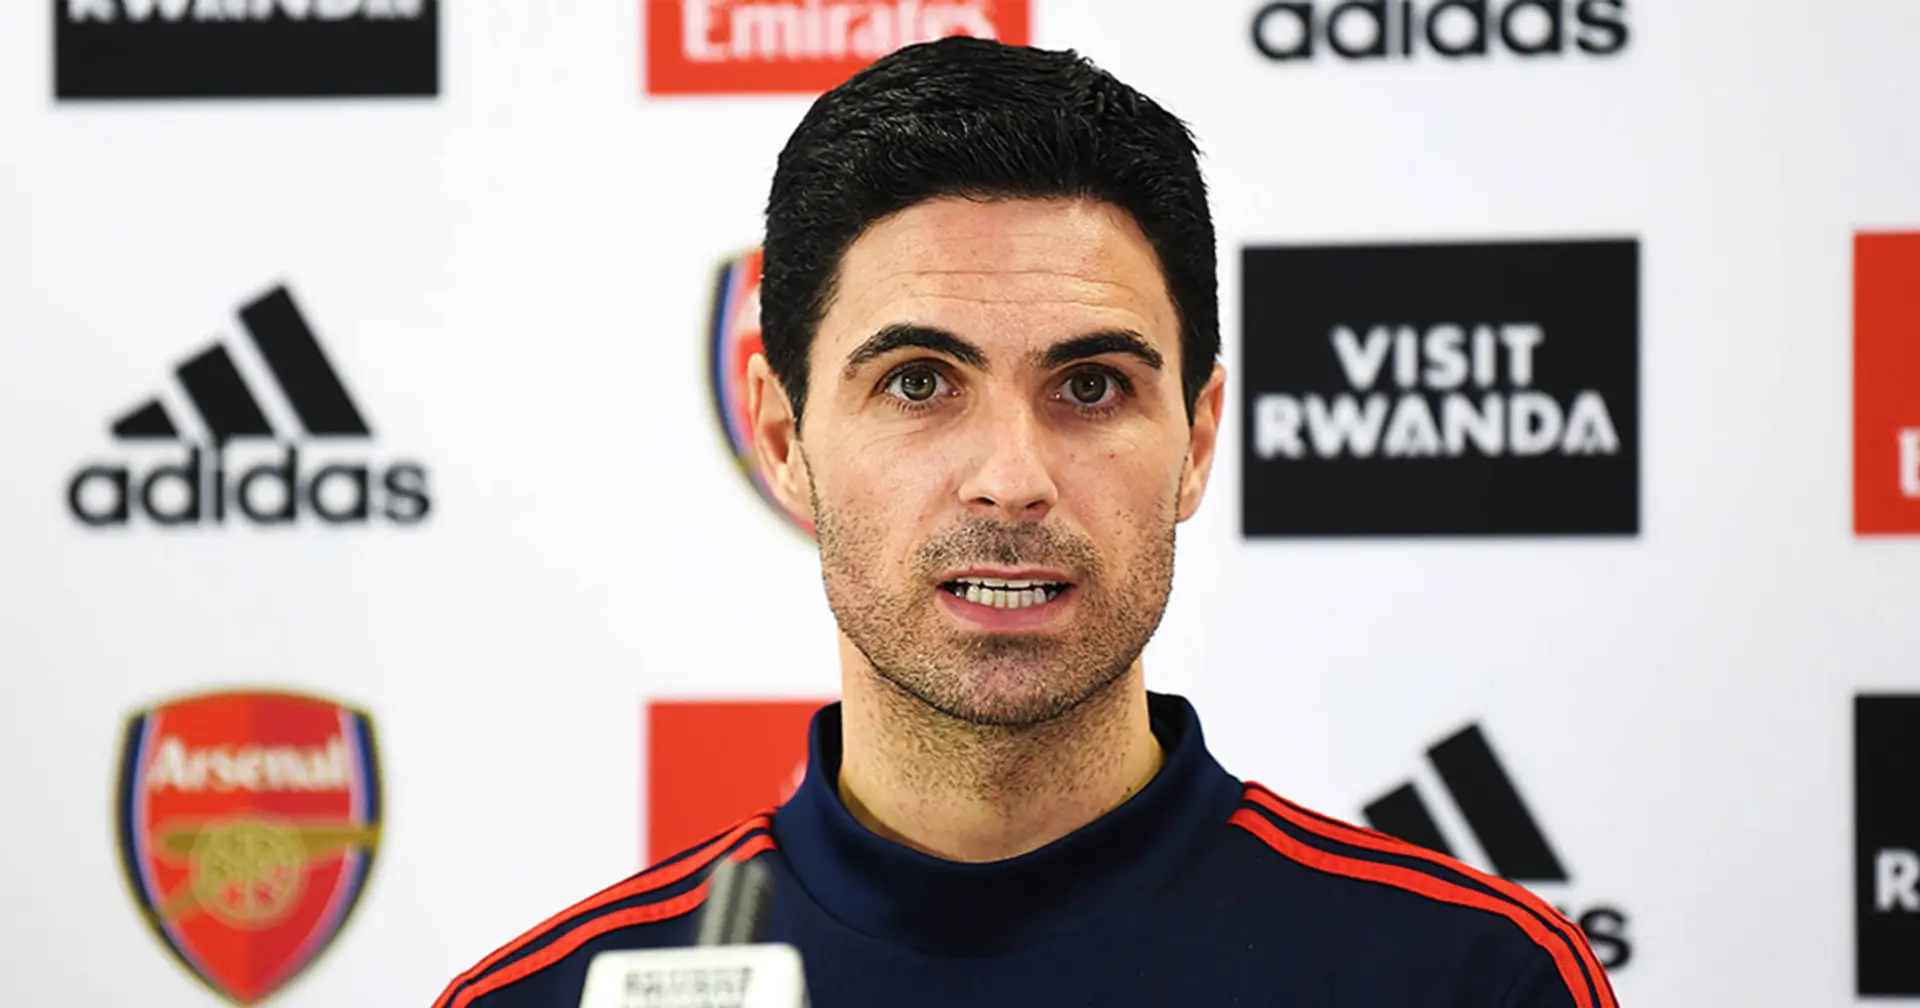 'I have to earn that': Mikel Arteta explains what he needs to achieve to stay at Arsenal long-term